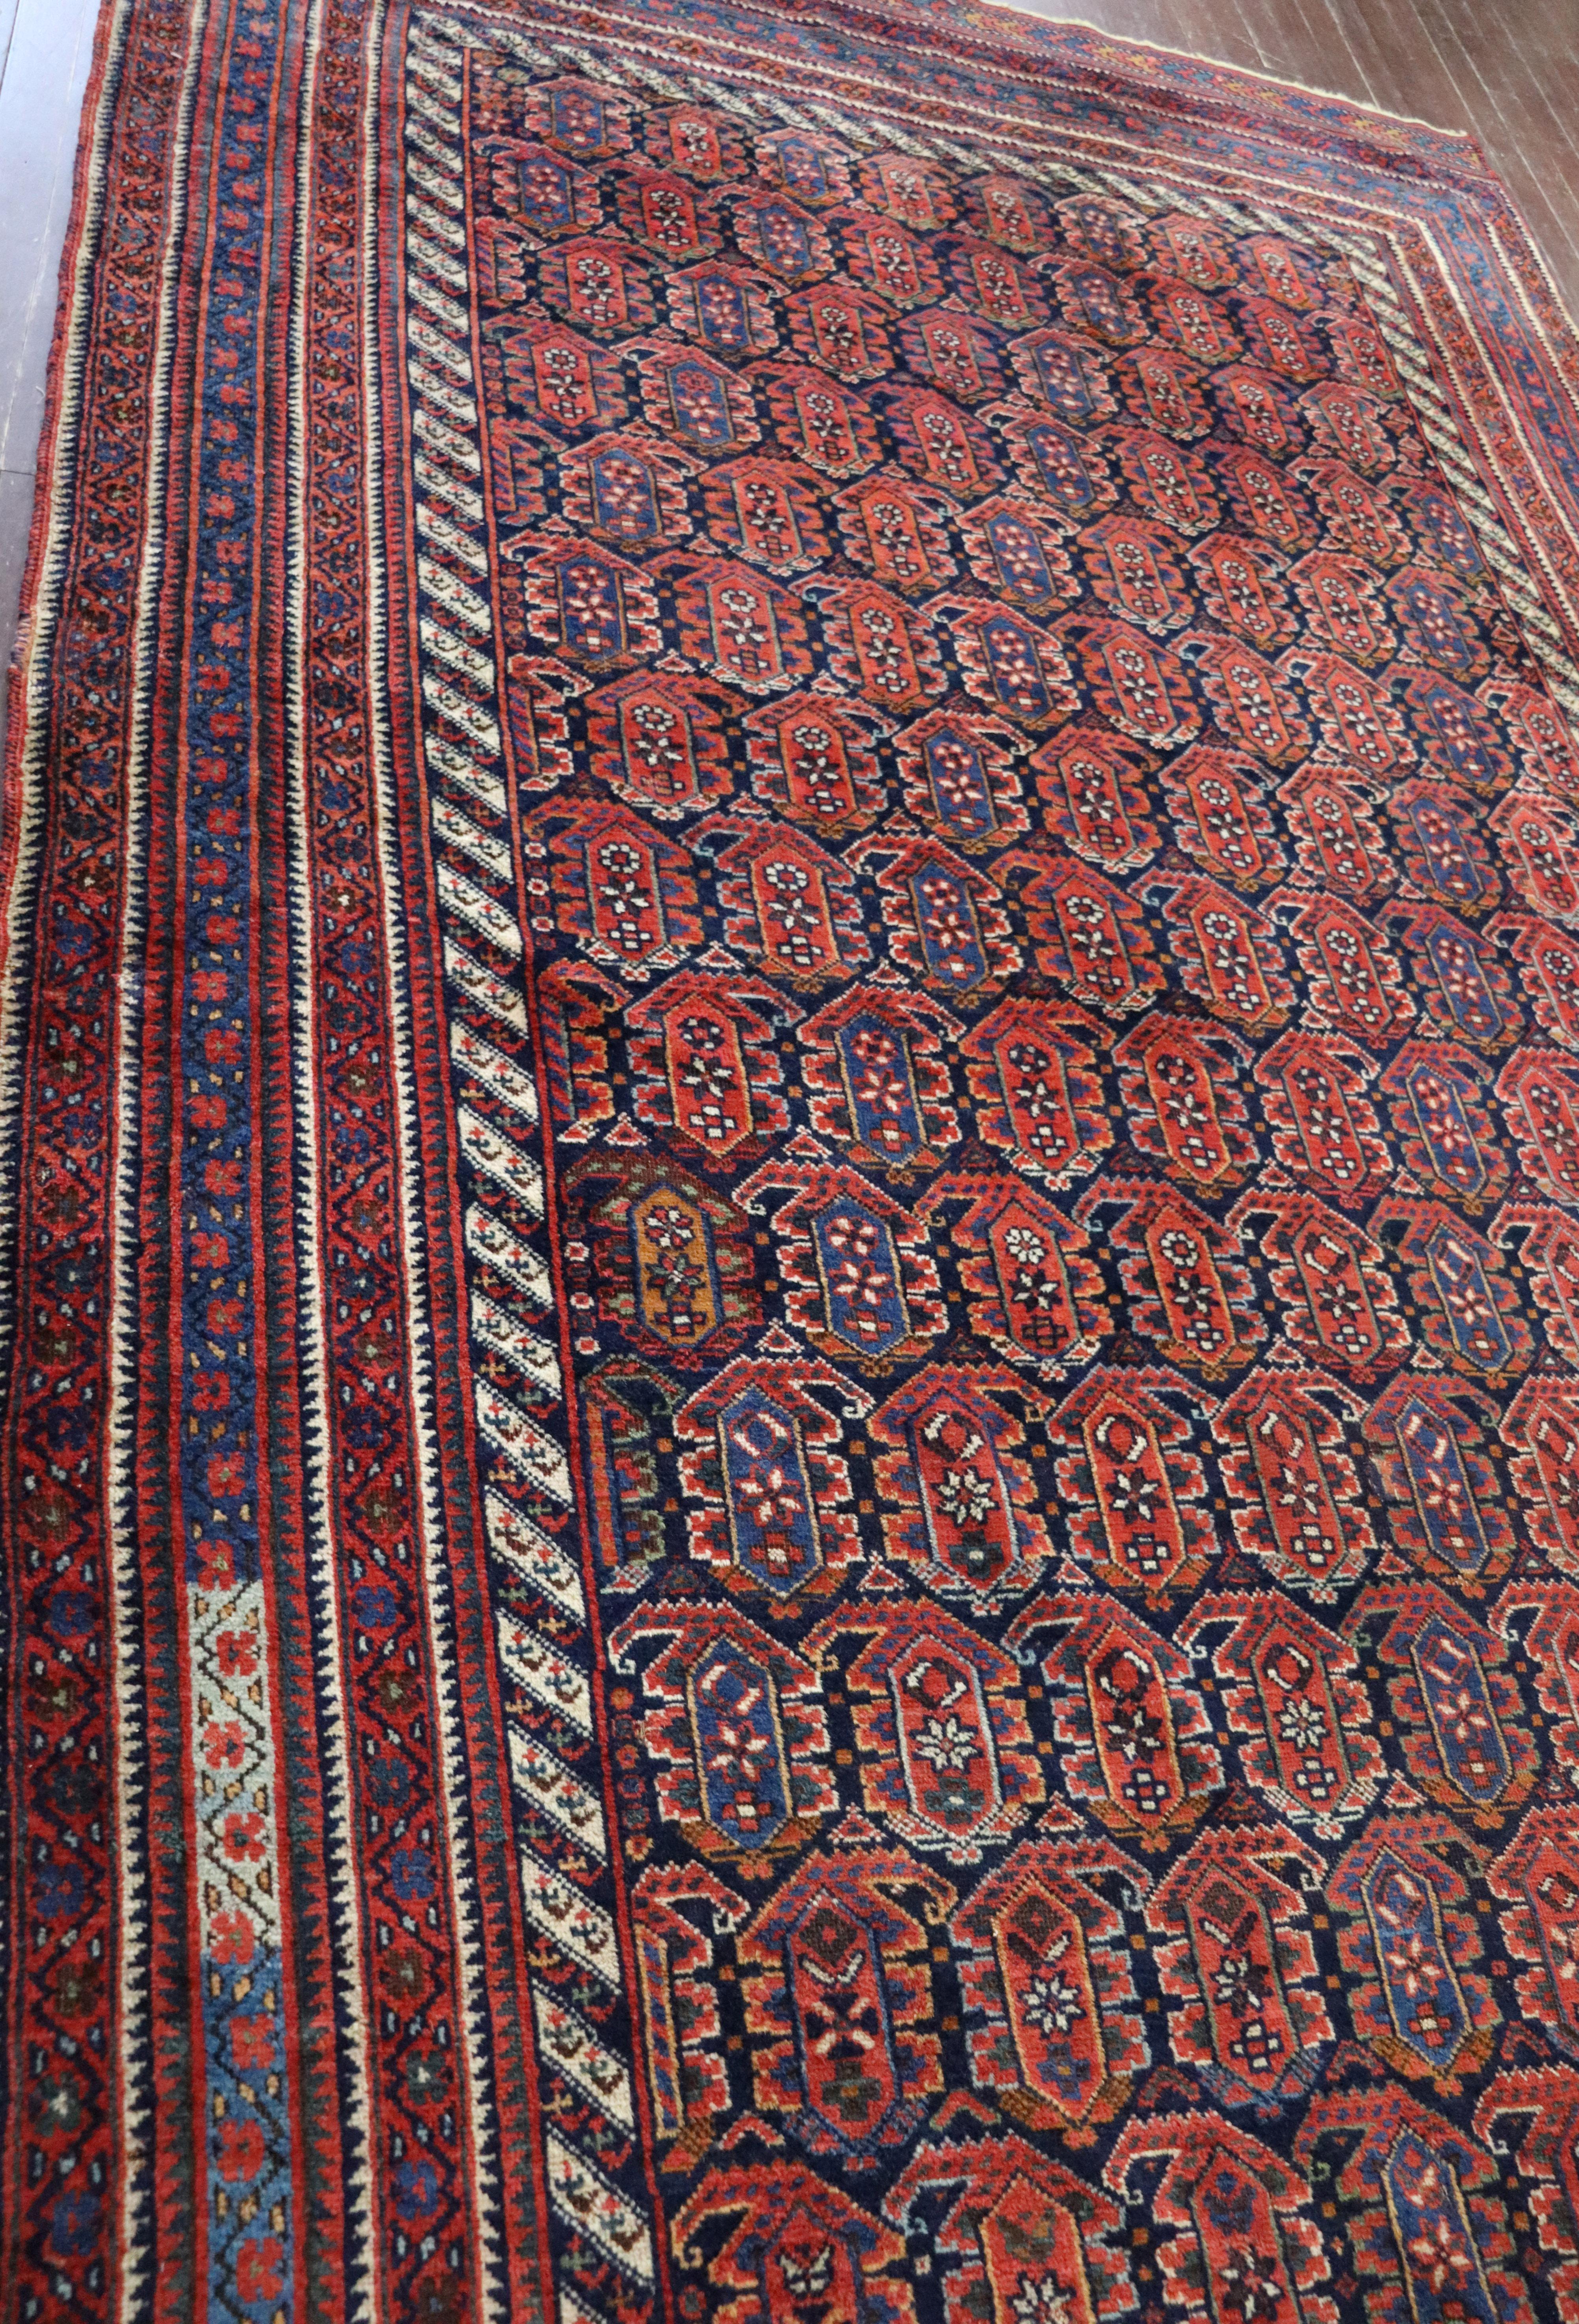 Hand-Knotted Antique Persian Afshar Carpet, Magnificent, Tribal, 5'8